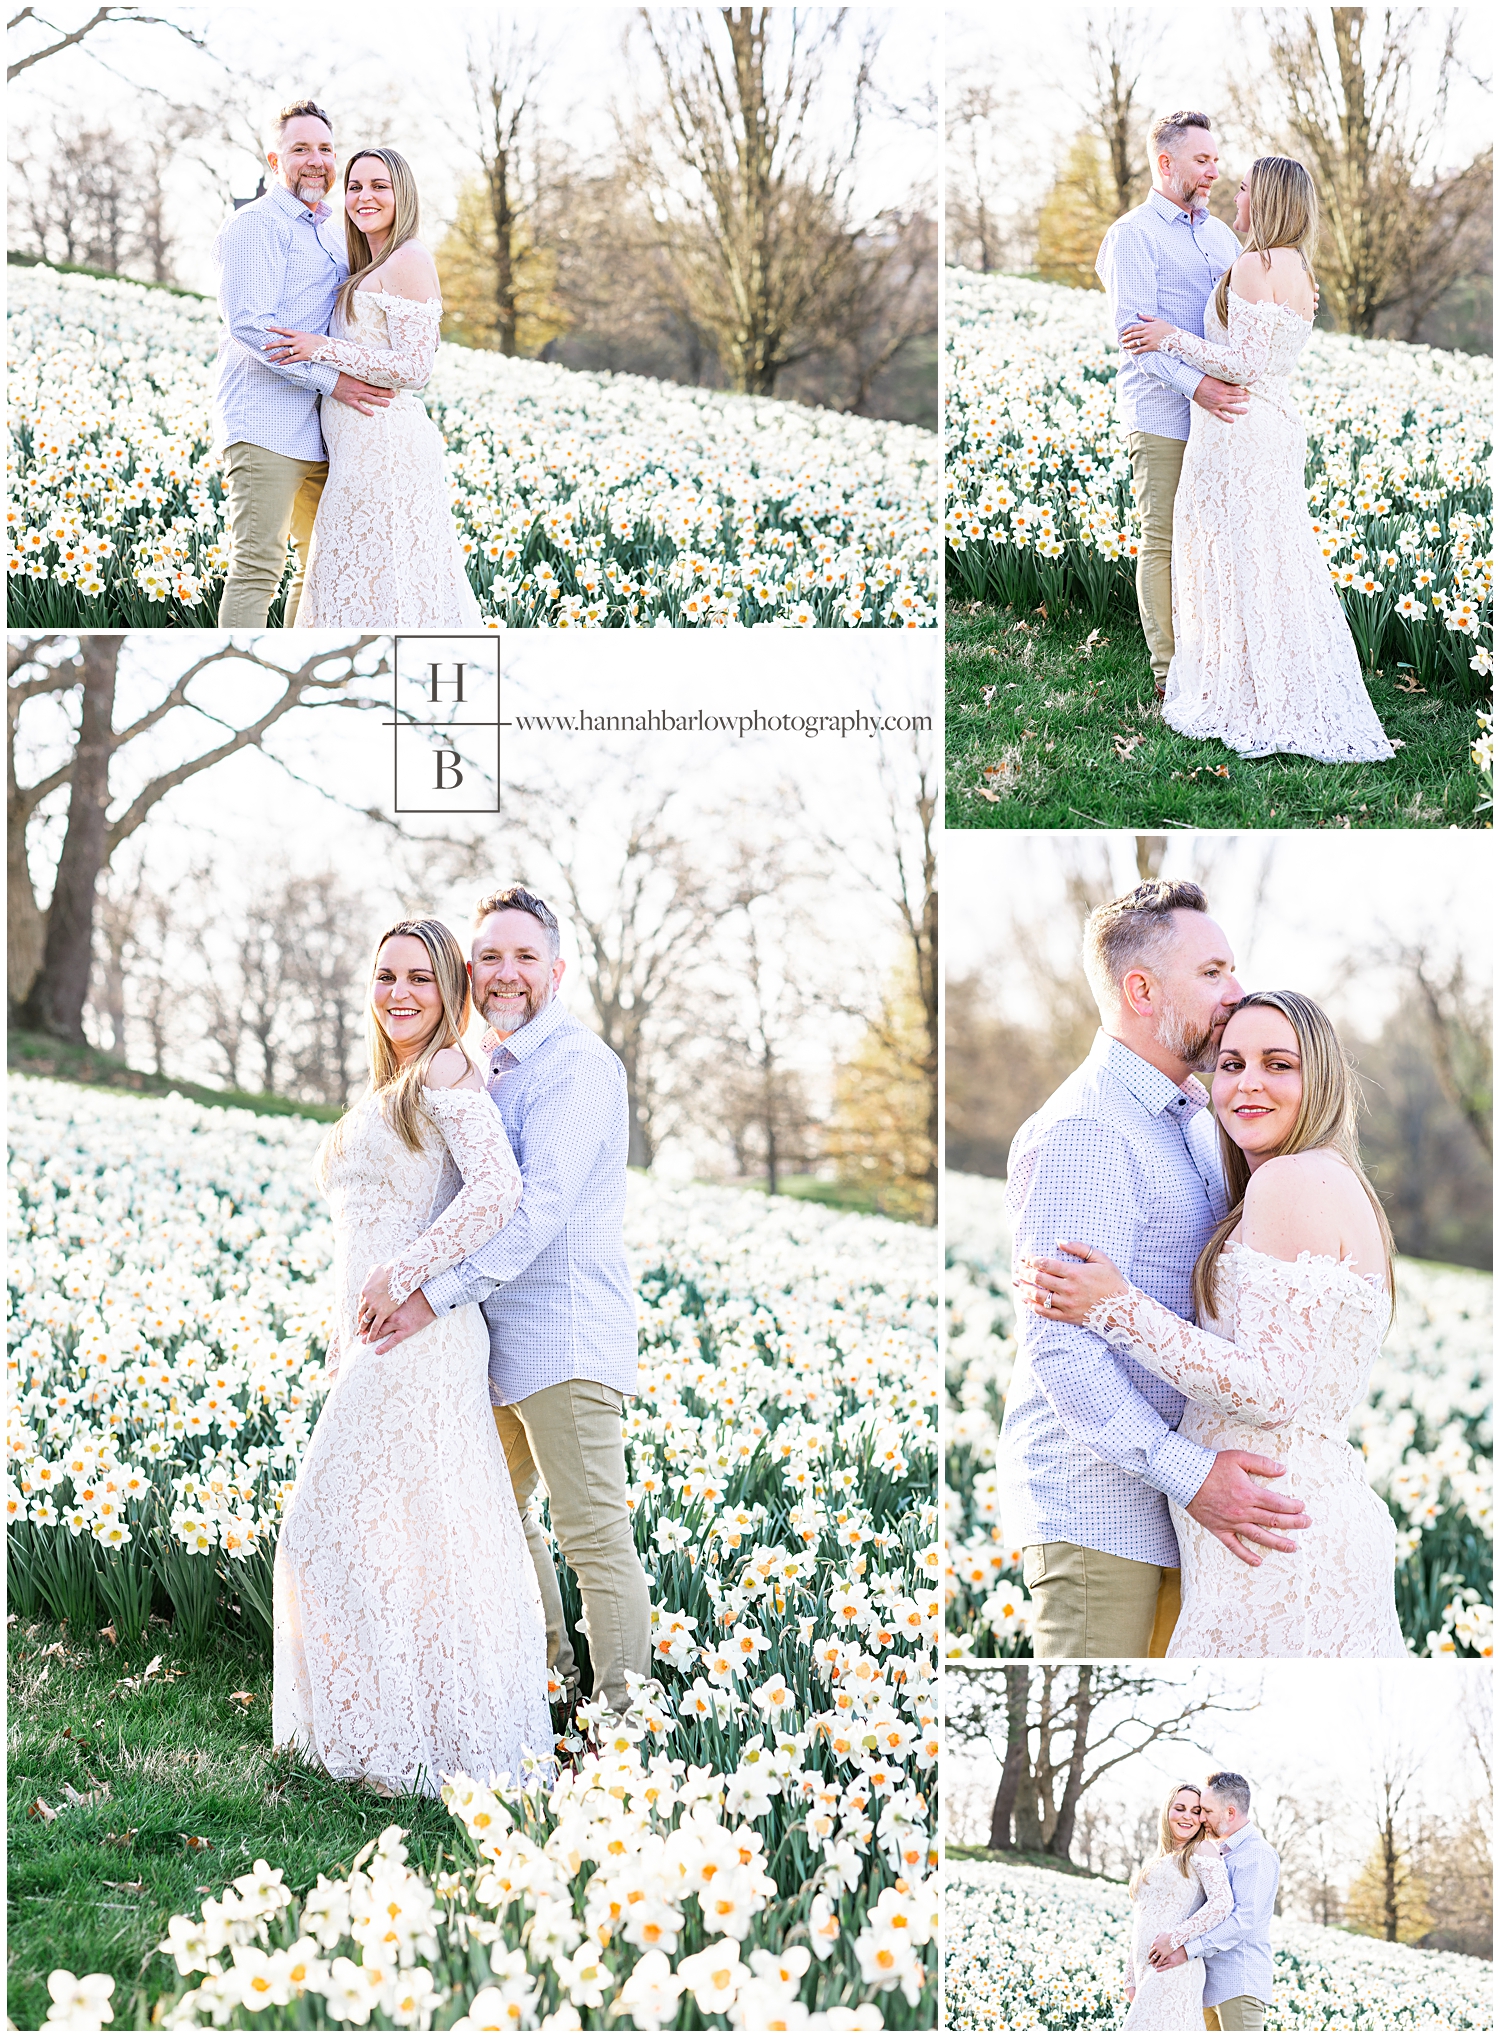 Collage of couple posing for engagement photos in white daffodil field.